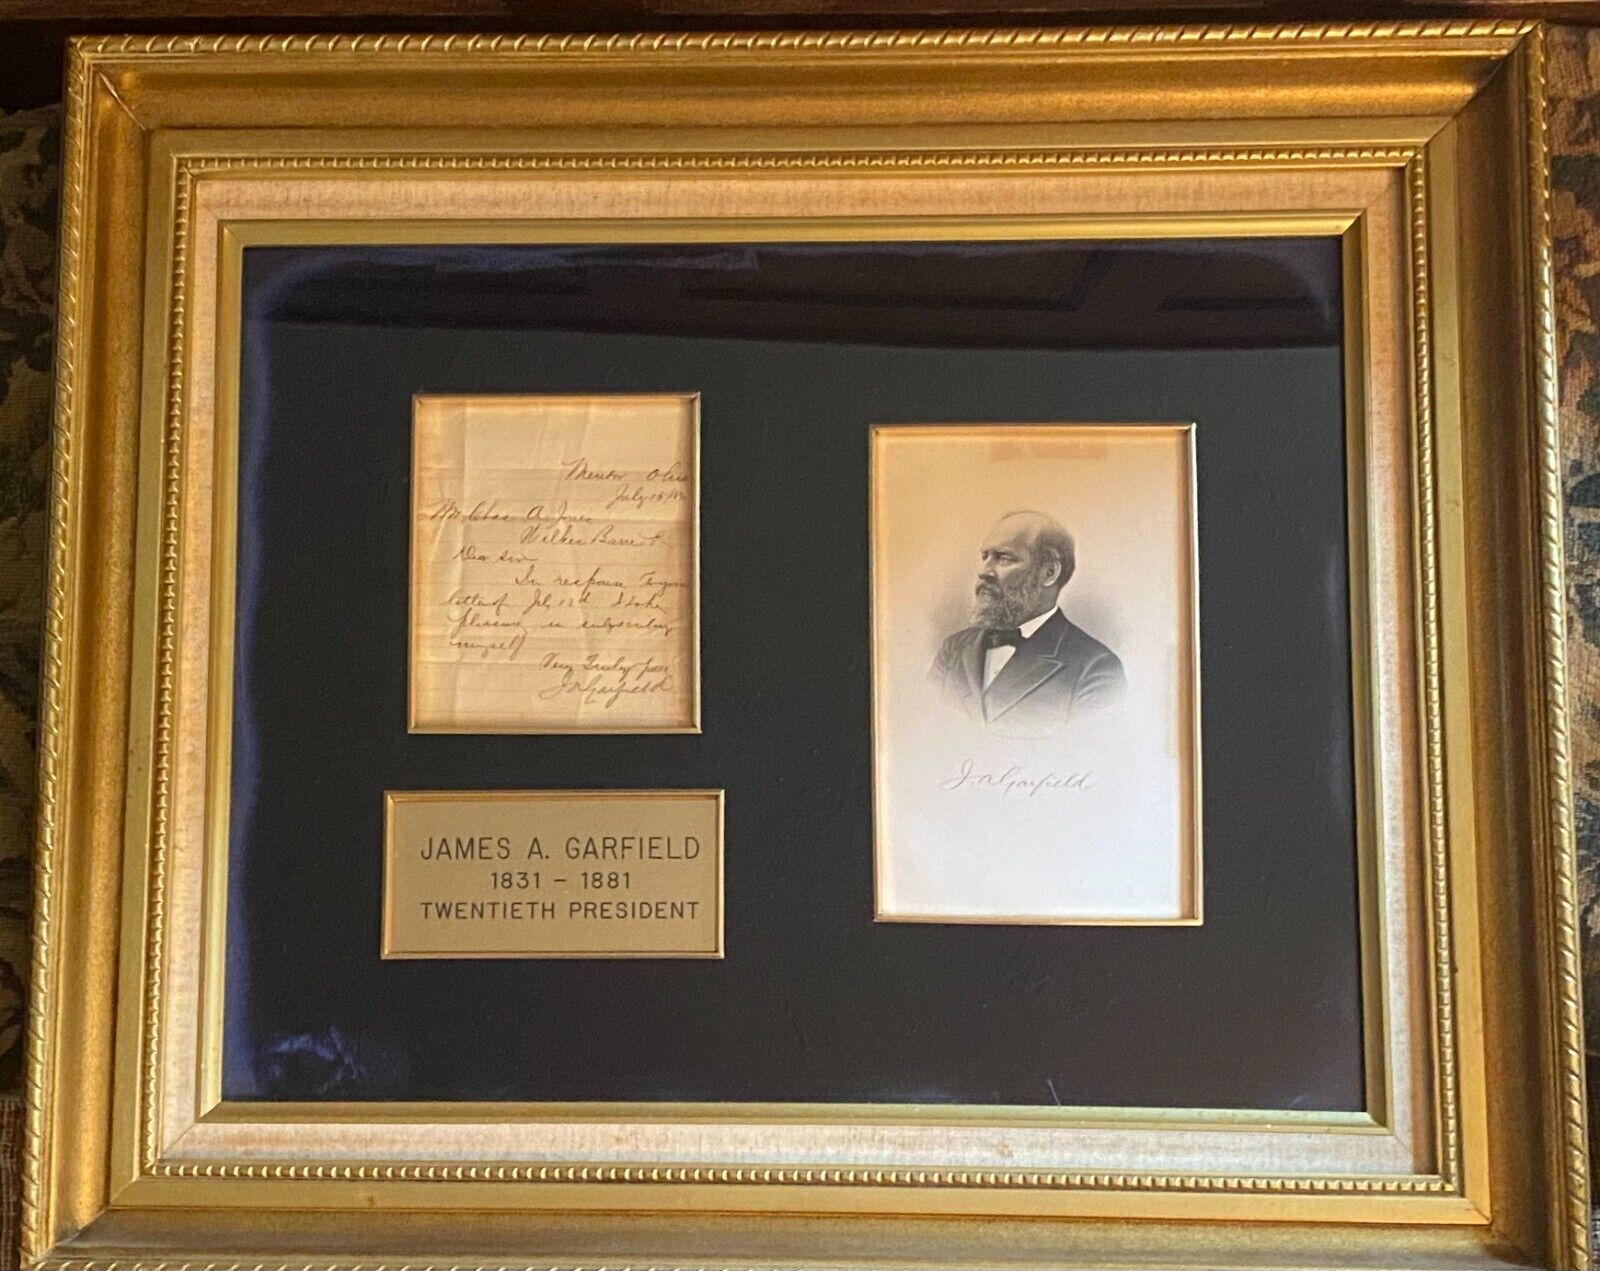 BEAUTIFULLY FRAMED President-Nominee JAMES A. GARFIELD Sends Autograph (1880) OH